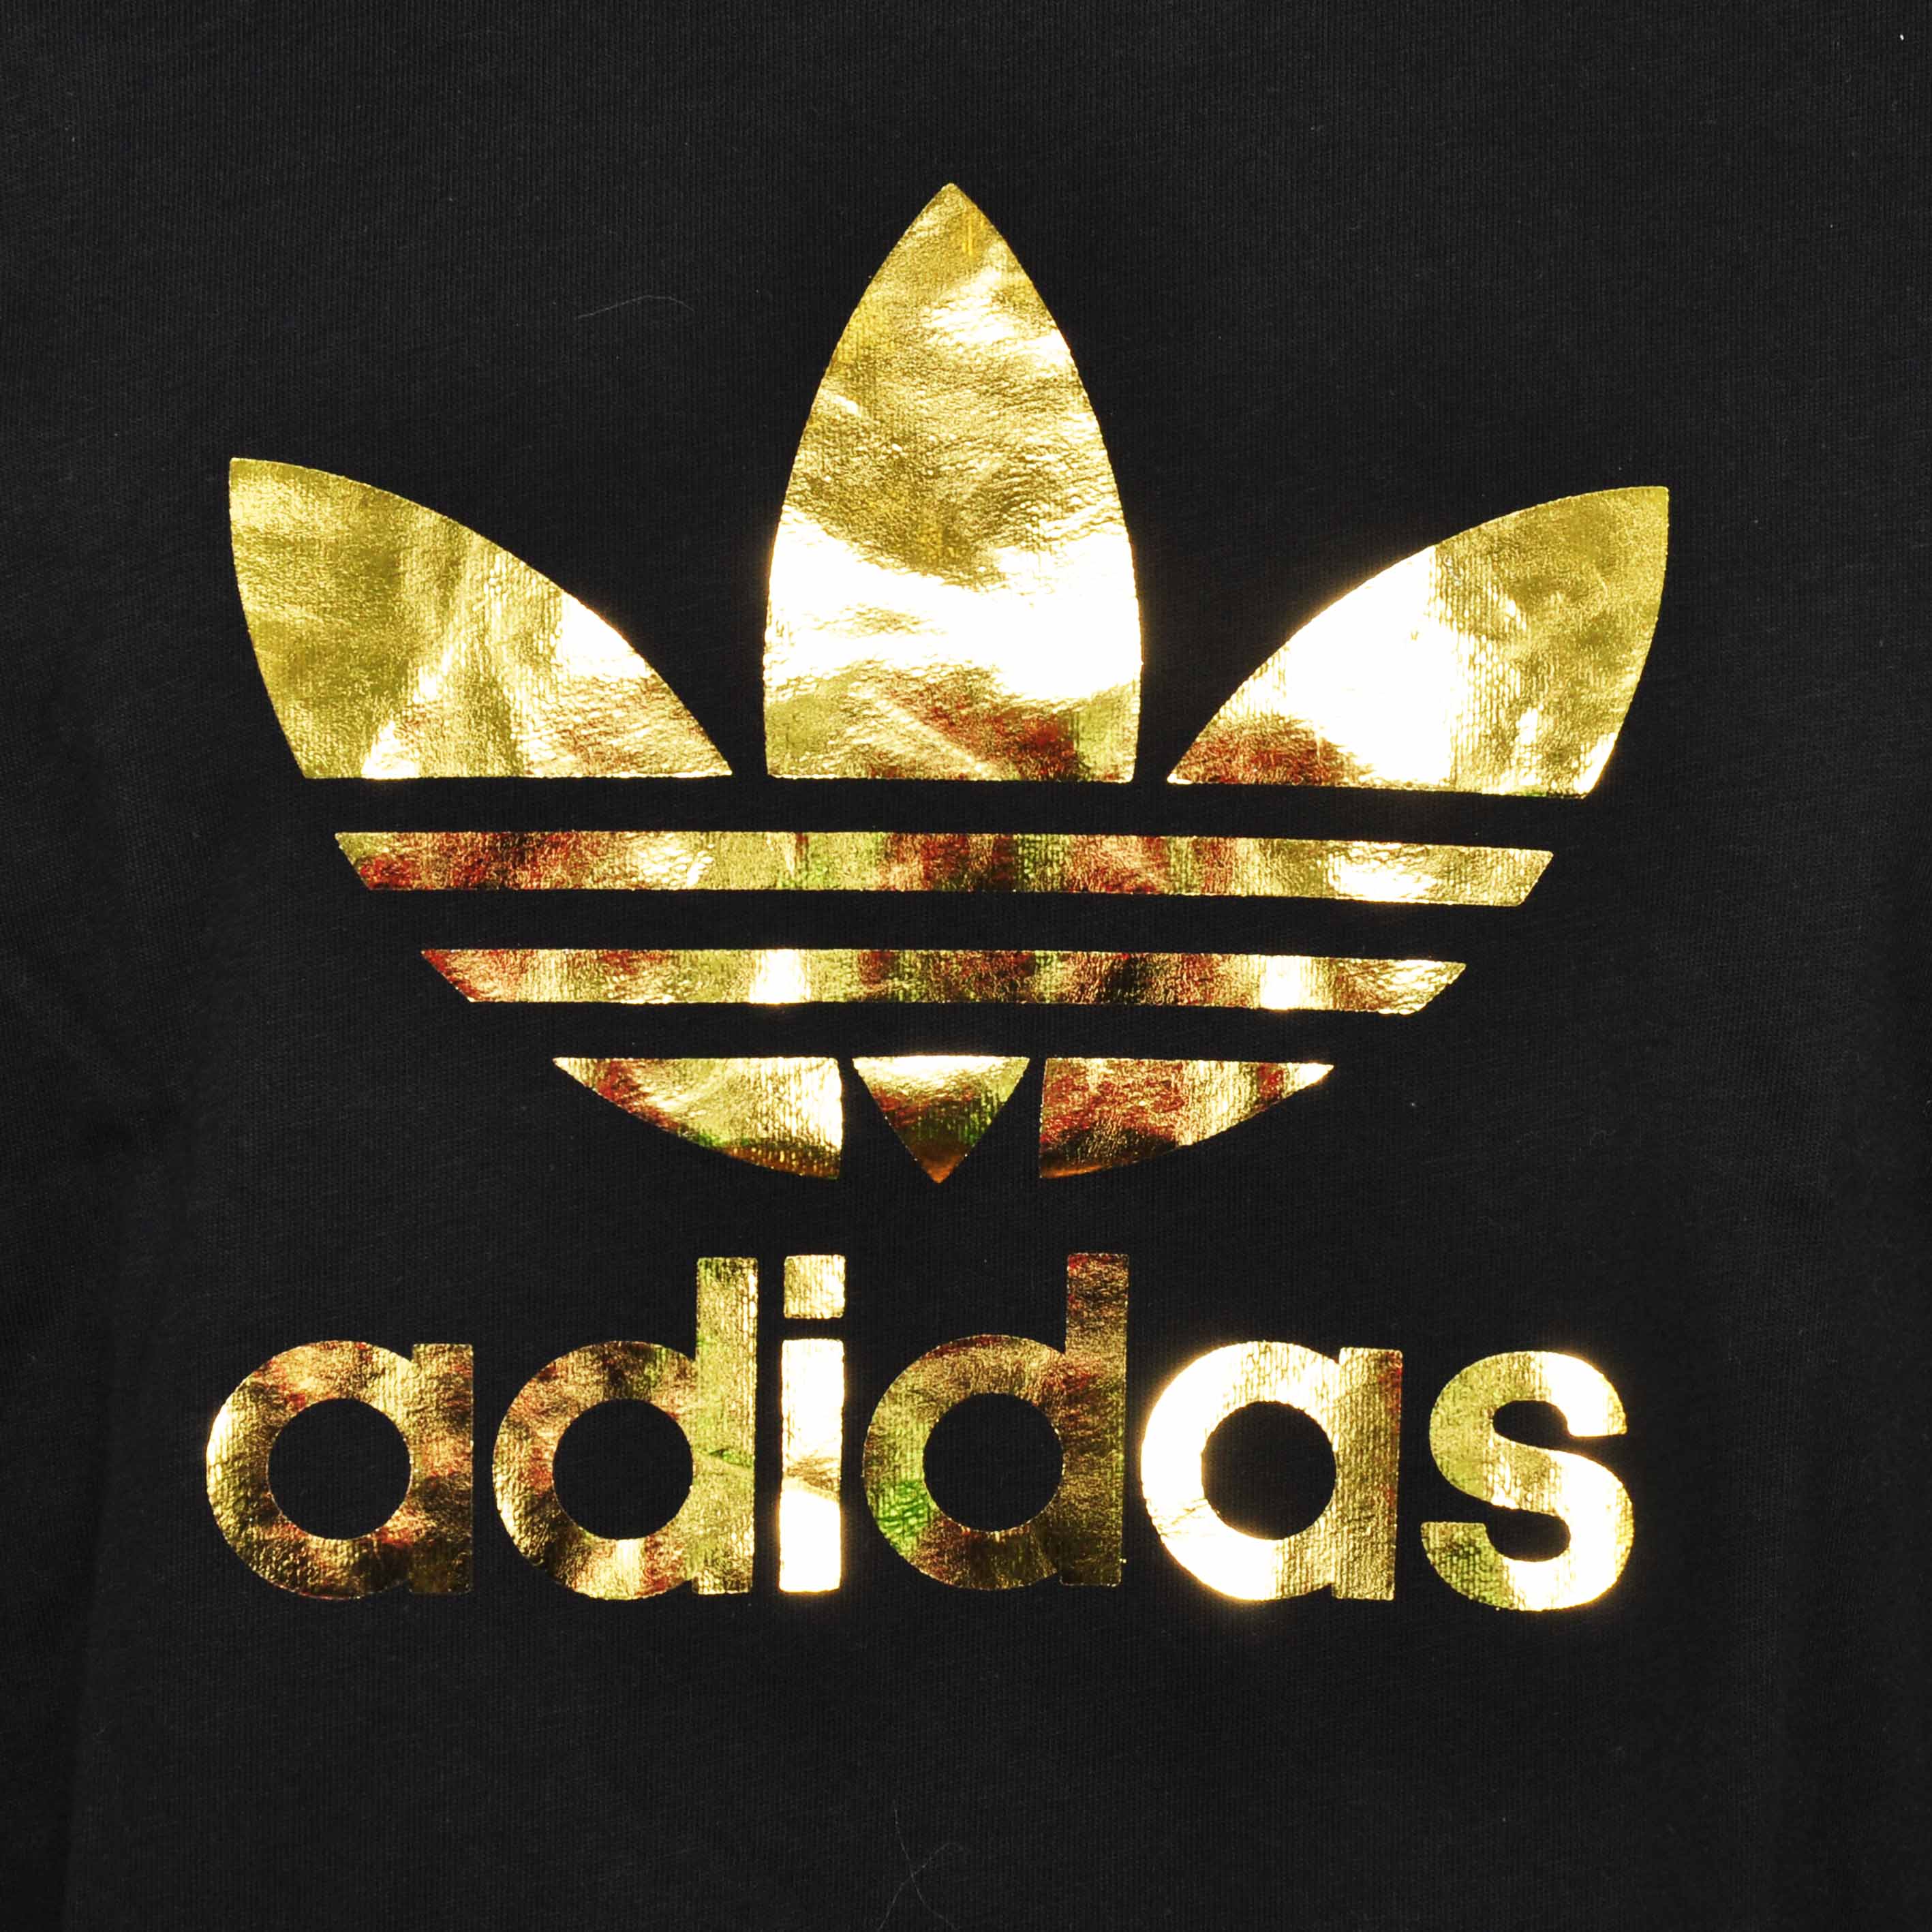 adidas for roblox